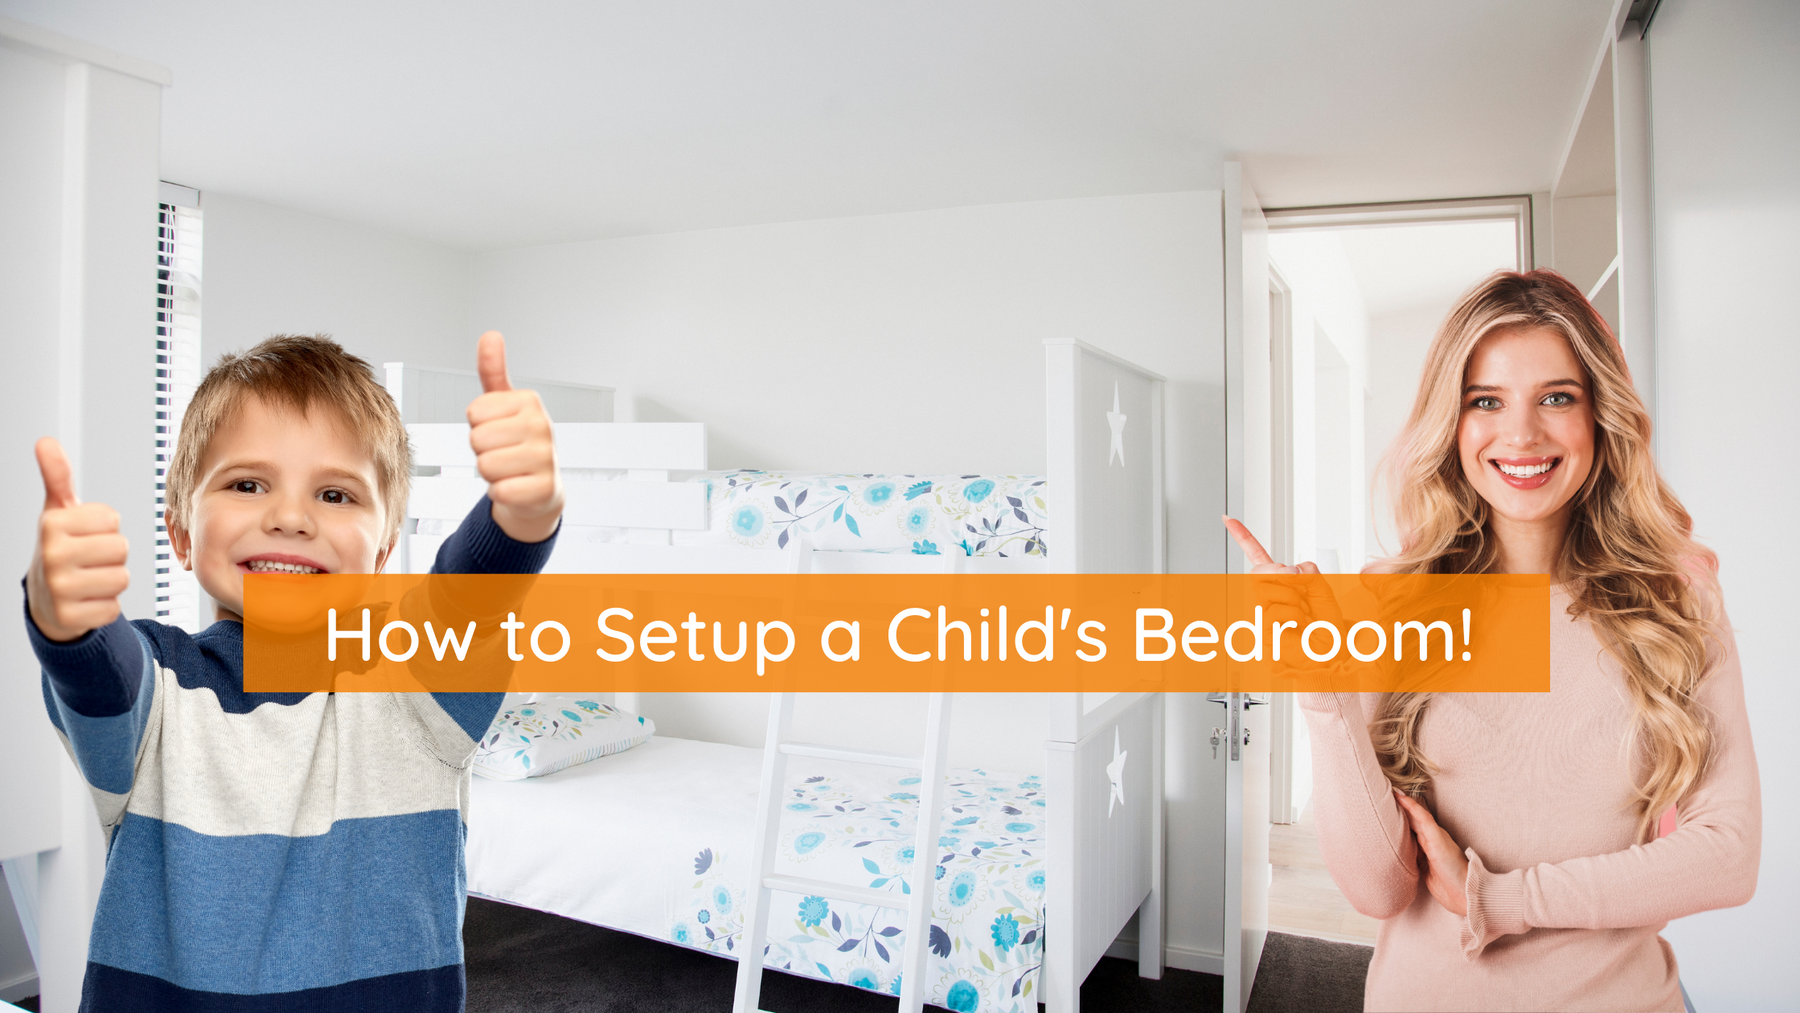 How to Setup a Child's Bedroom! - Mainland Furniture NZ